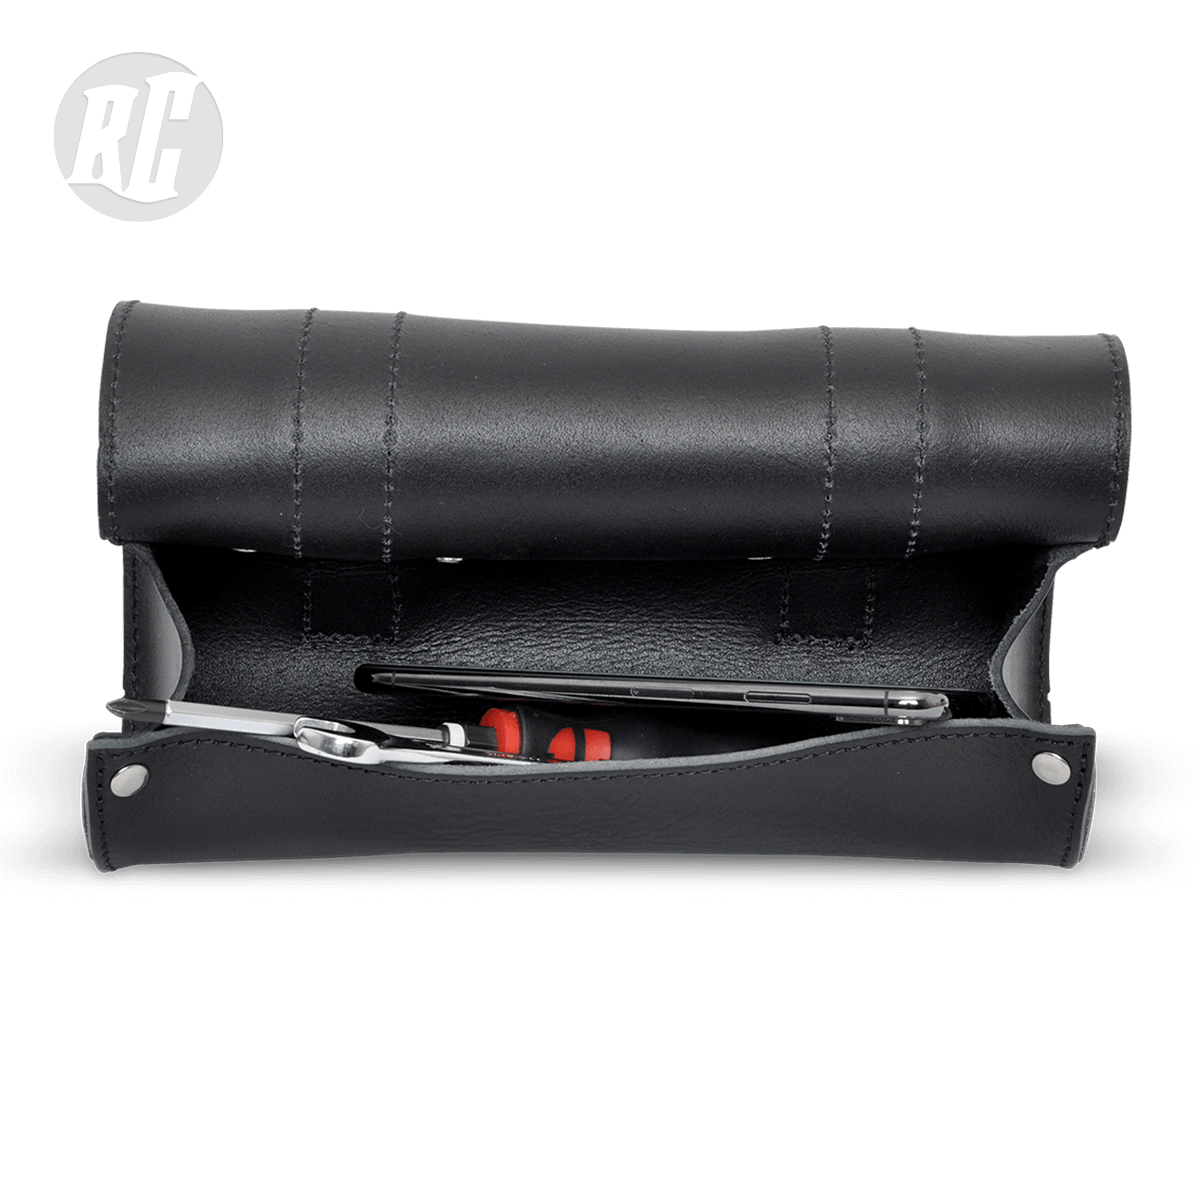 RUFF CYCLES Leather Tool bag - black